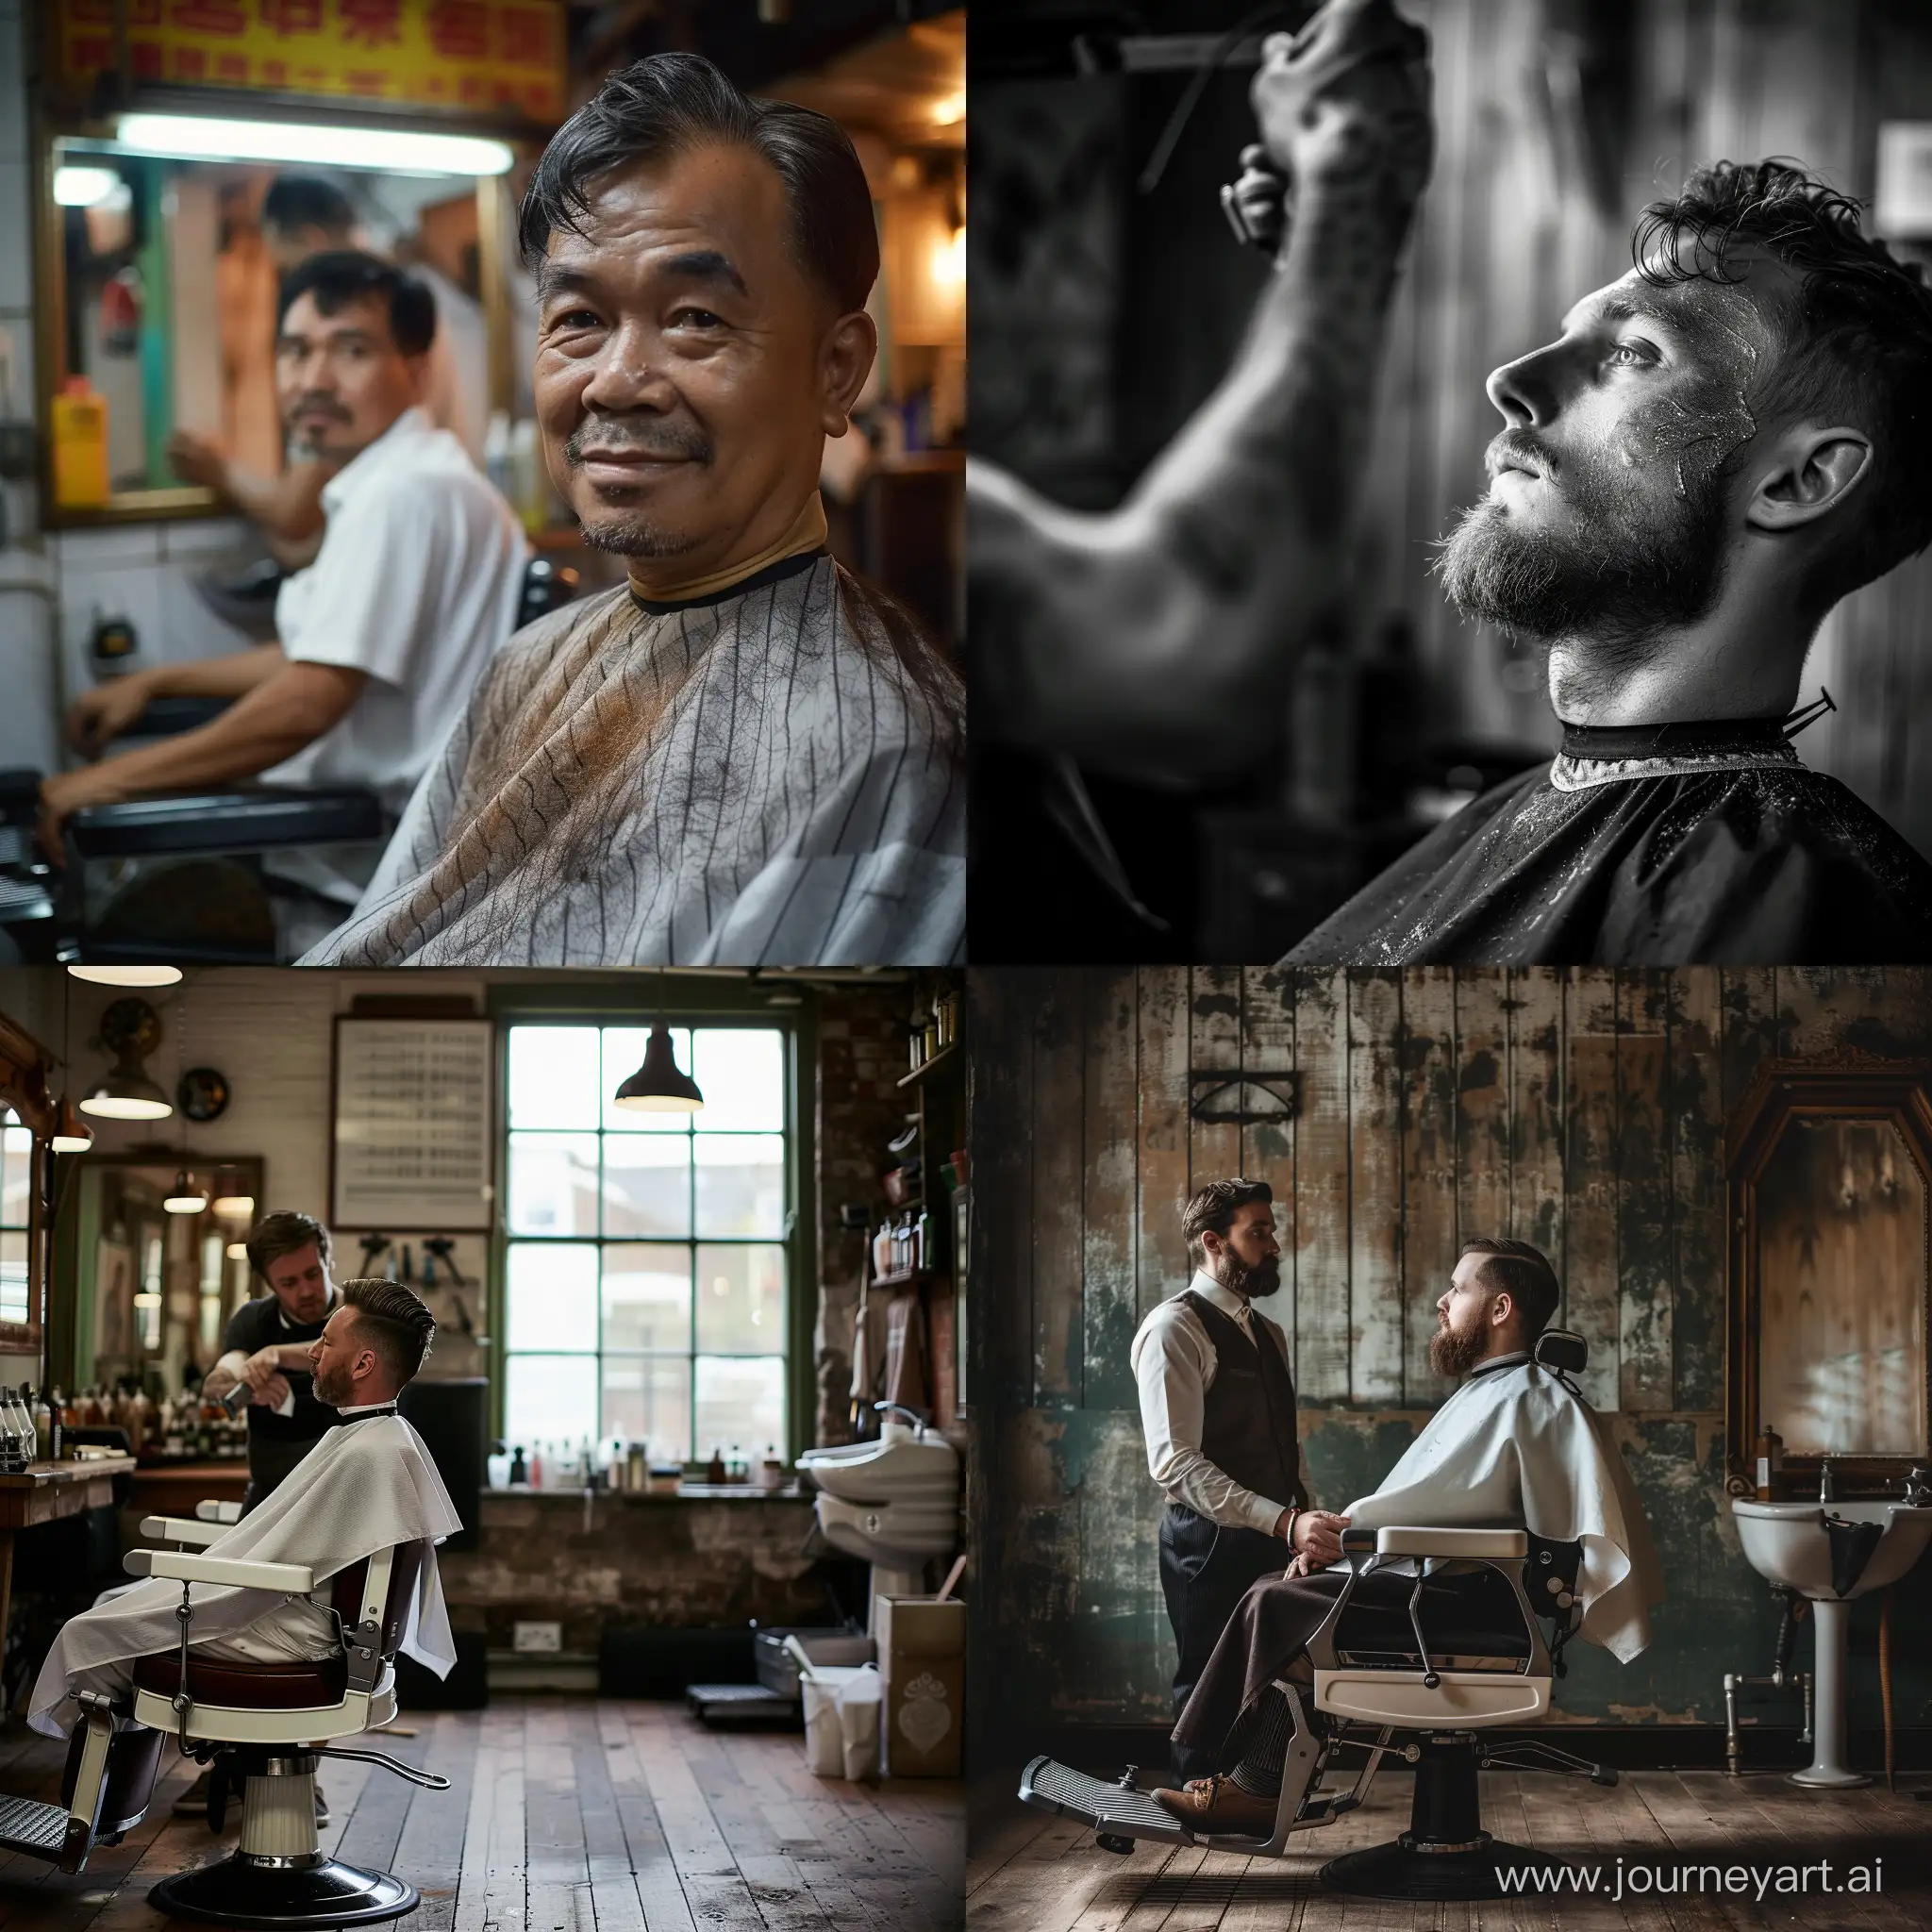 Professional-Barber-Styling-Mans-Hair-in-a-Traditional-Barber-Shop